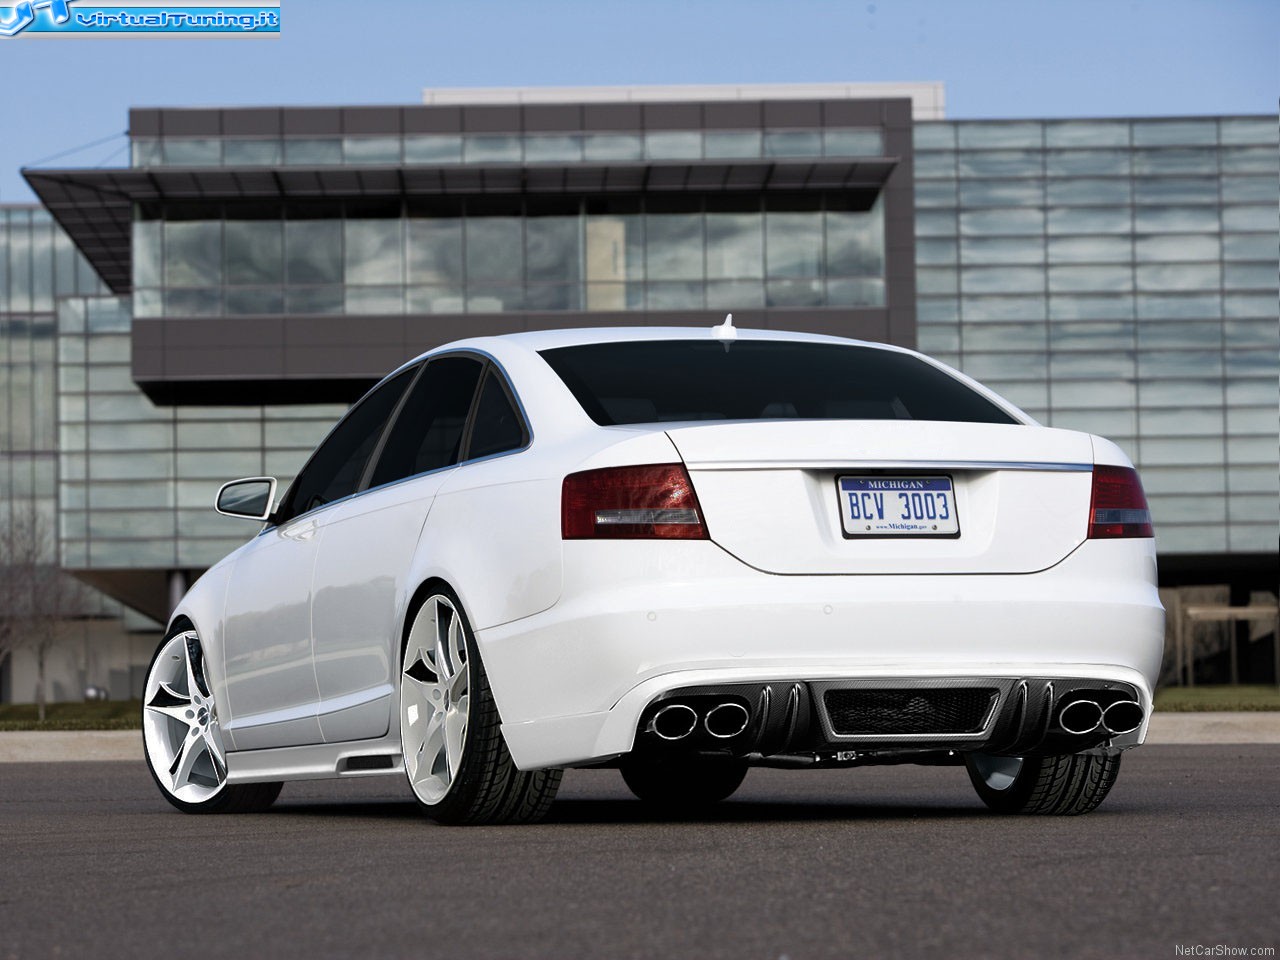 VirtualTuning AUDI A6 by Phisicalmind